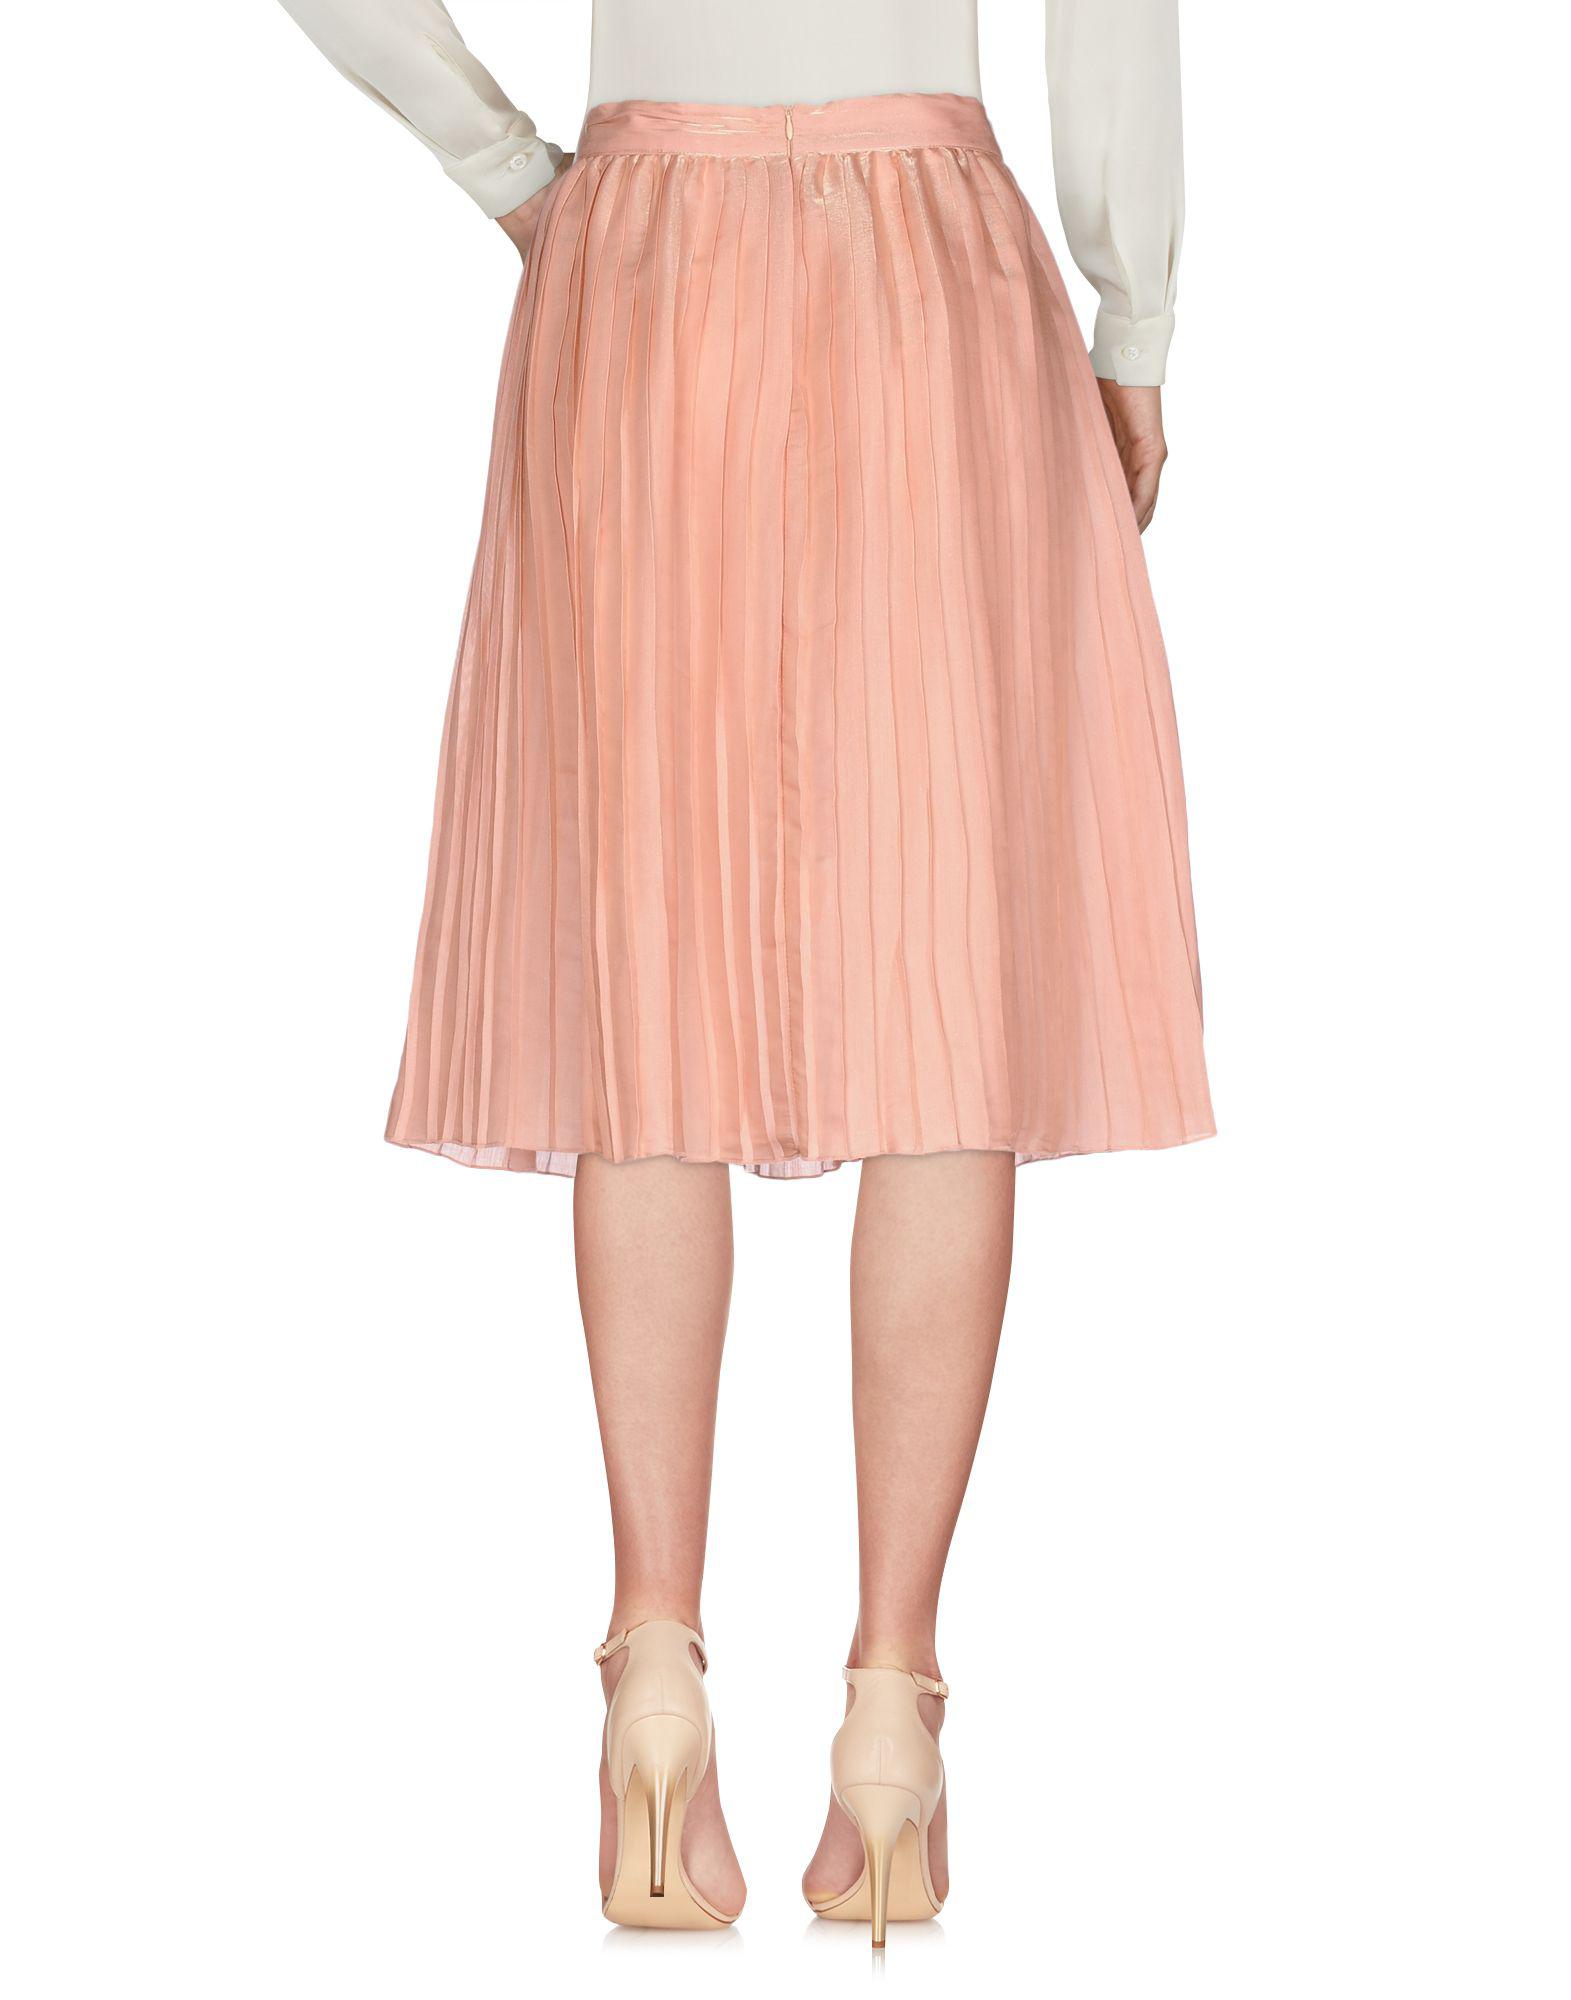 Glamorous Synthetic Knee Length Skirt in Pale Pink (Pink) - Lyst